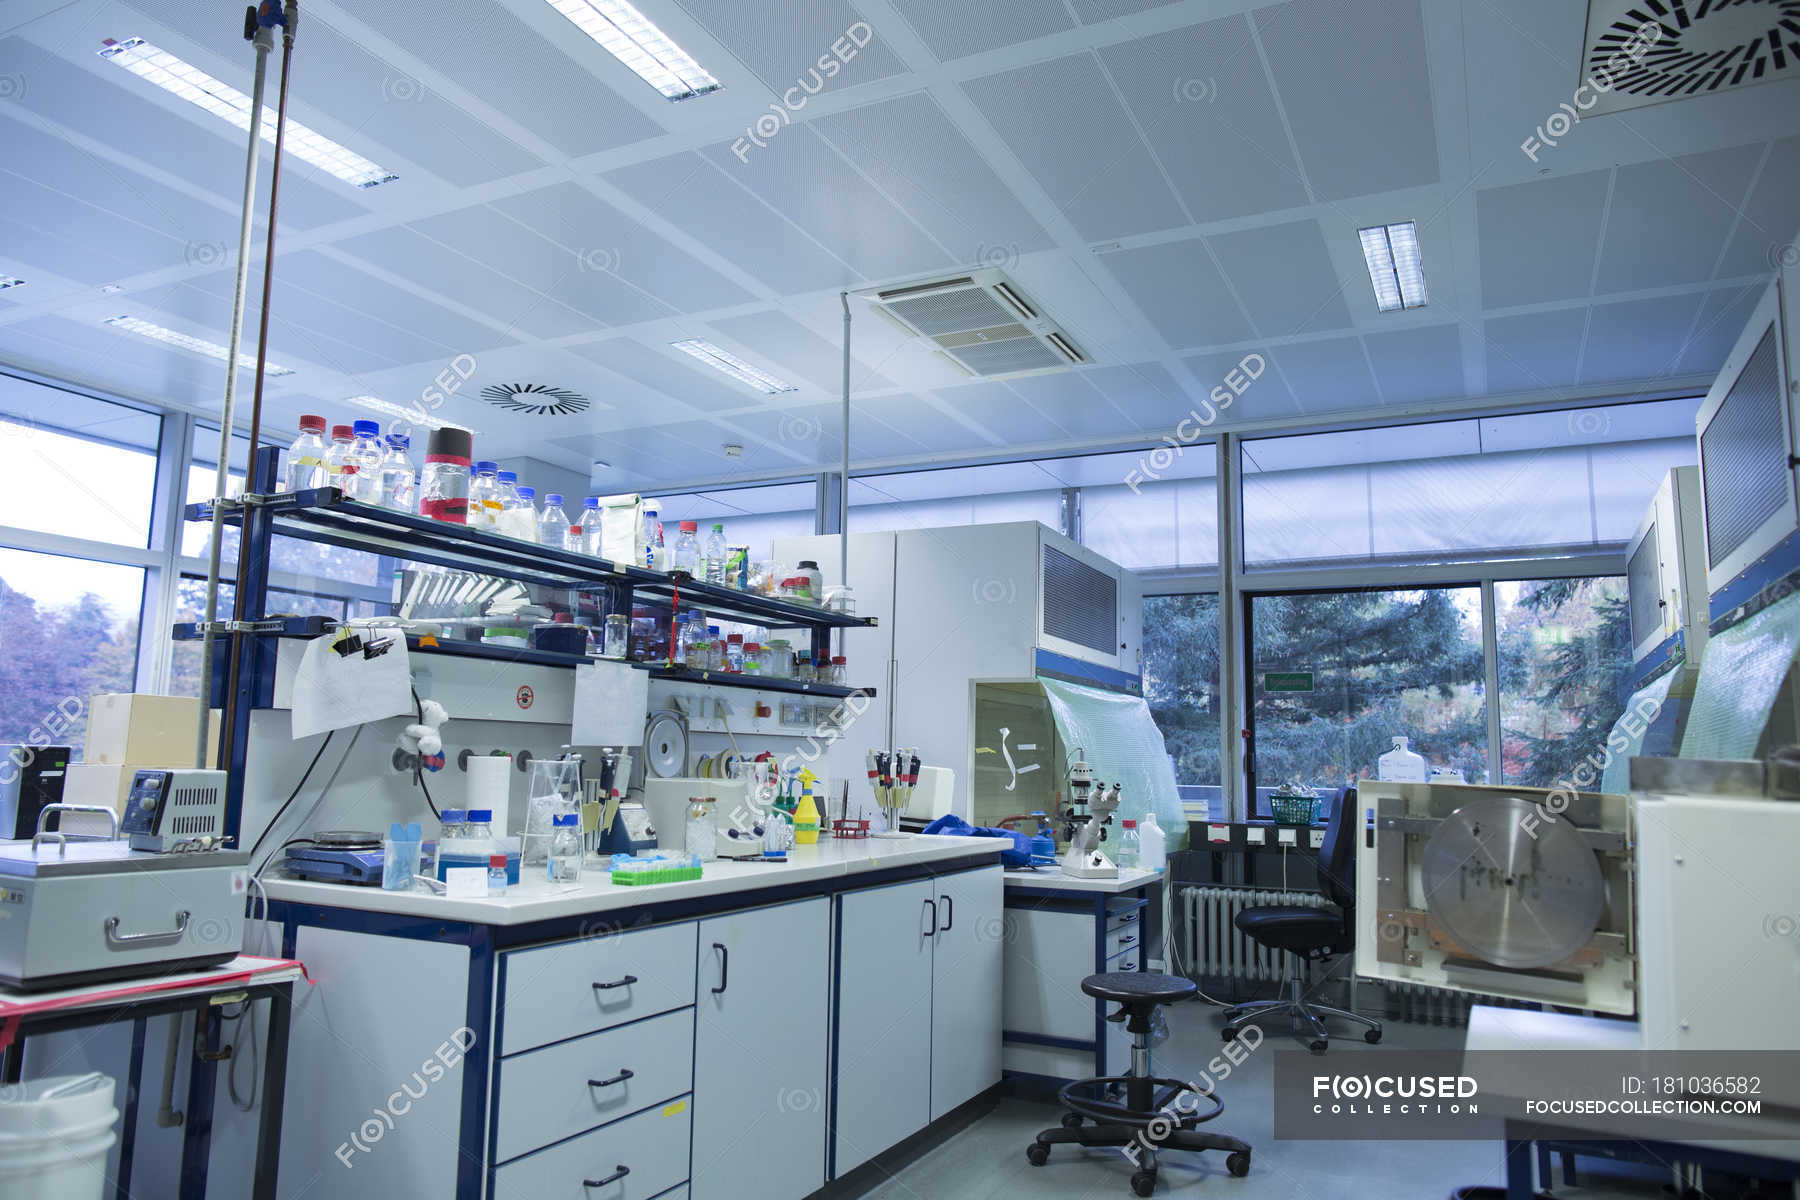 Daytime interior of a bright biological laboratory — development,  complexity - Stock Photo | #181036582